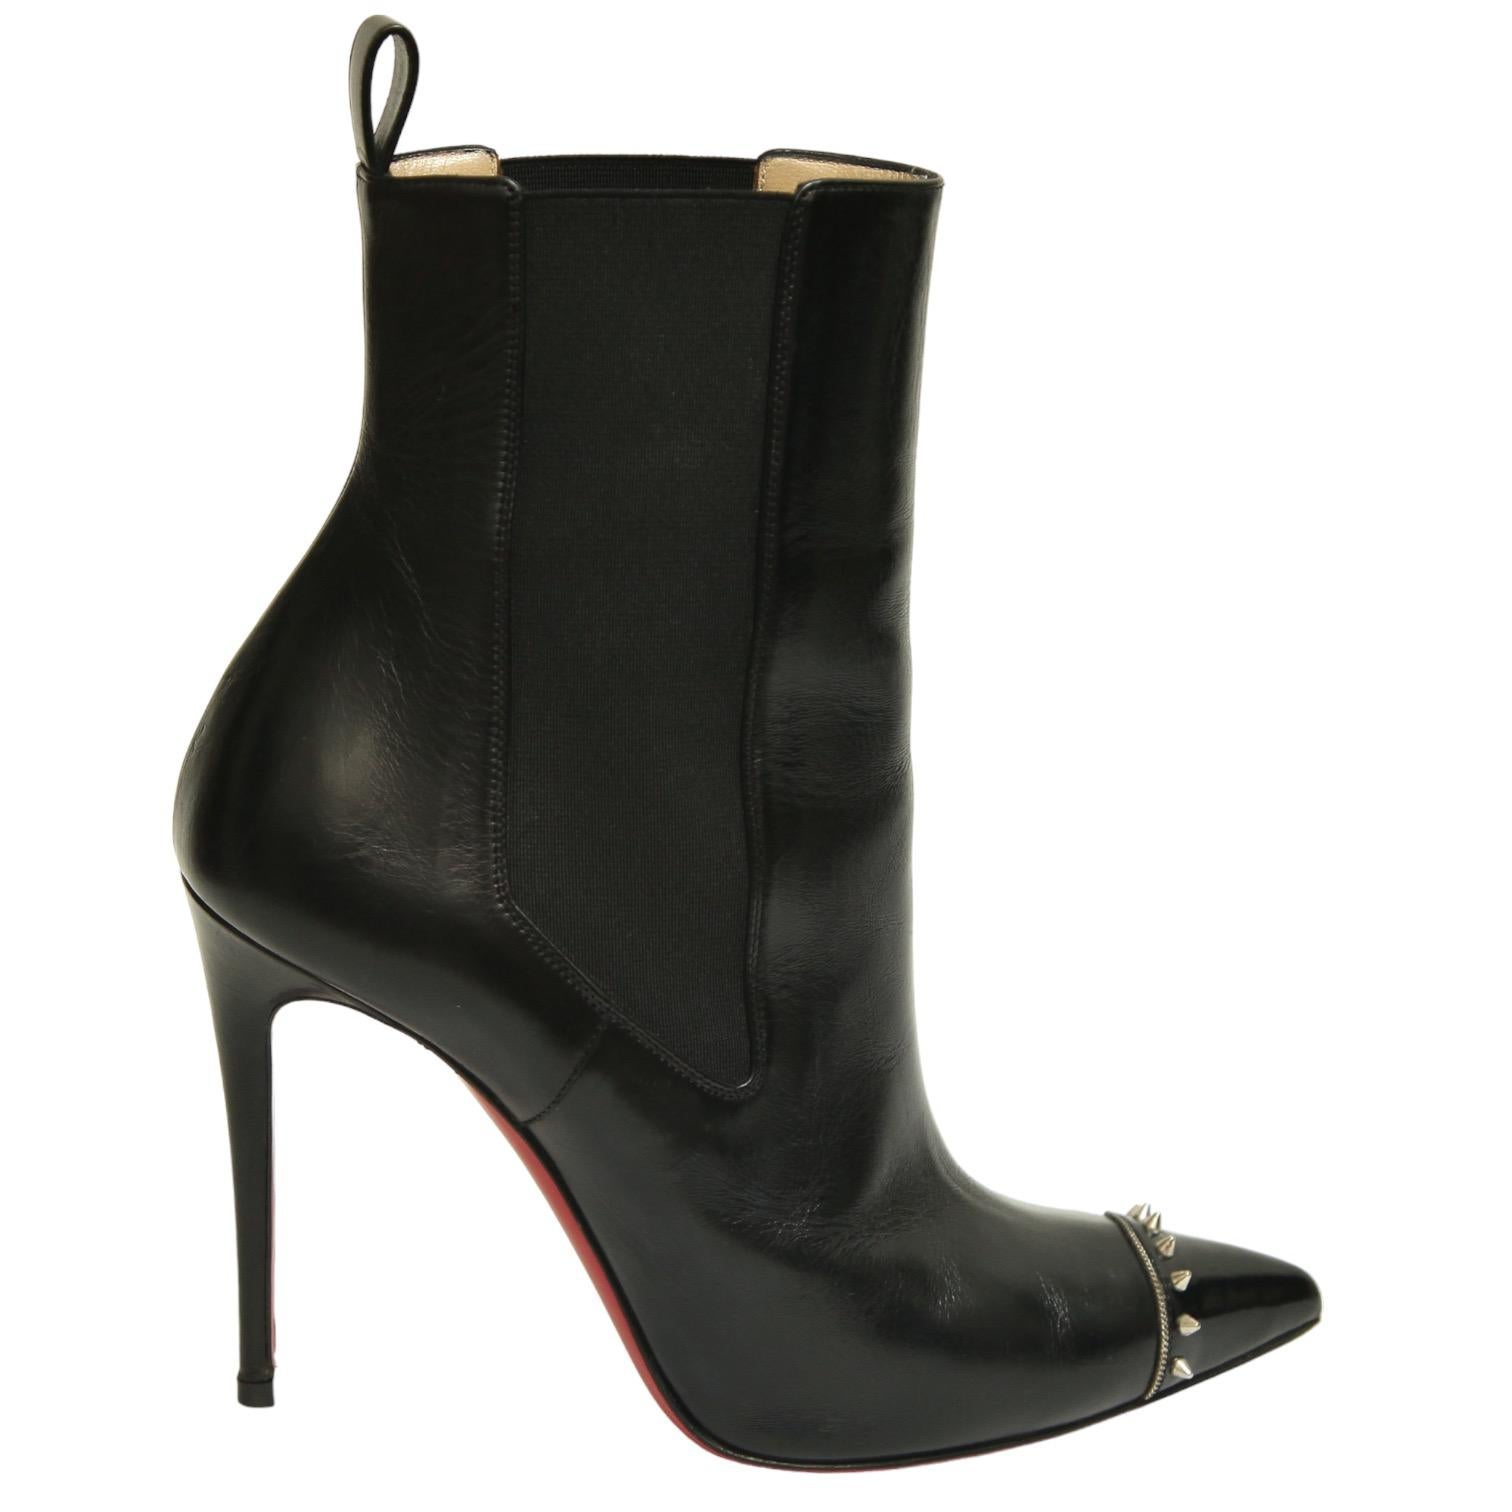 GUARANTEED AUTHENTIC CHRISTIAN LOUBOUTIN BLACK LEATHER BANJO SPIKED CAP TOE BOOTIES

Retail excluding sales taxes approximately $1,195

Details:
- Black leather uppers.
- Pointed cap toe with silver-tone spikes.
- Side elasticized pull on.
- Black